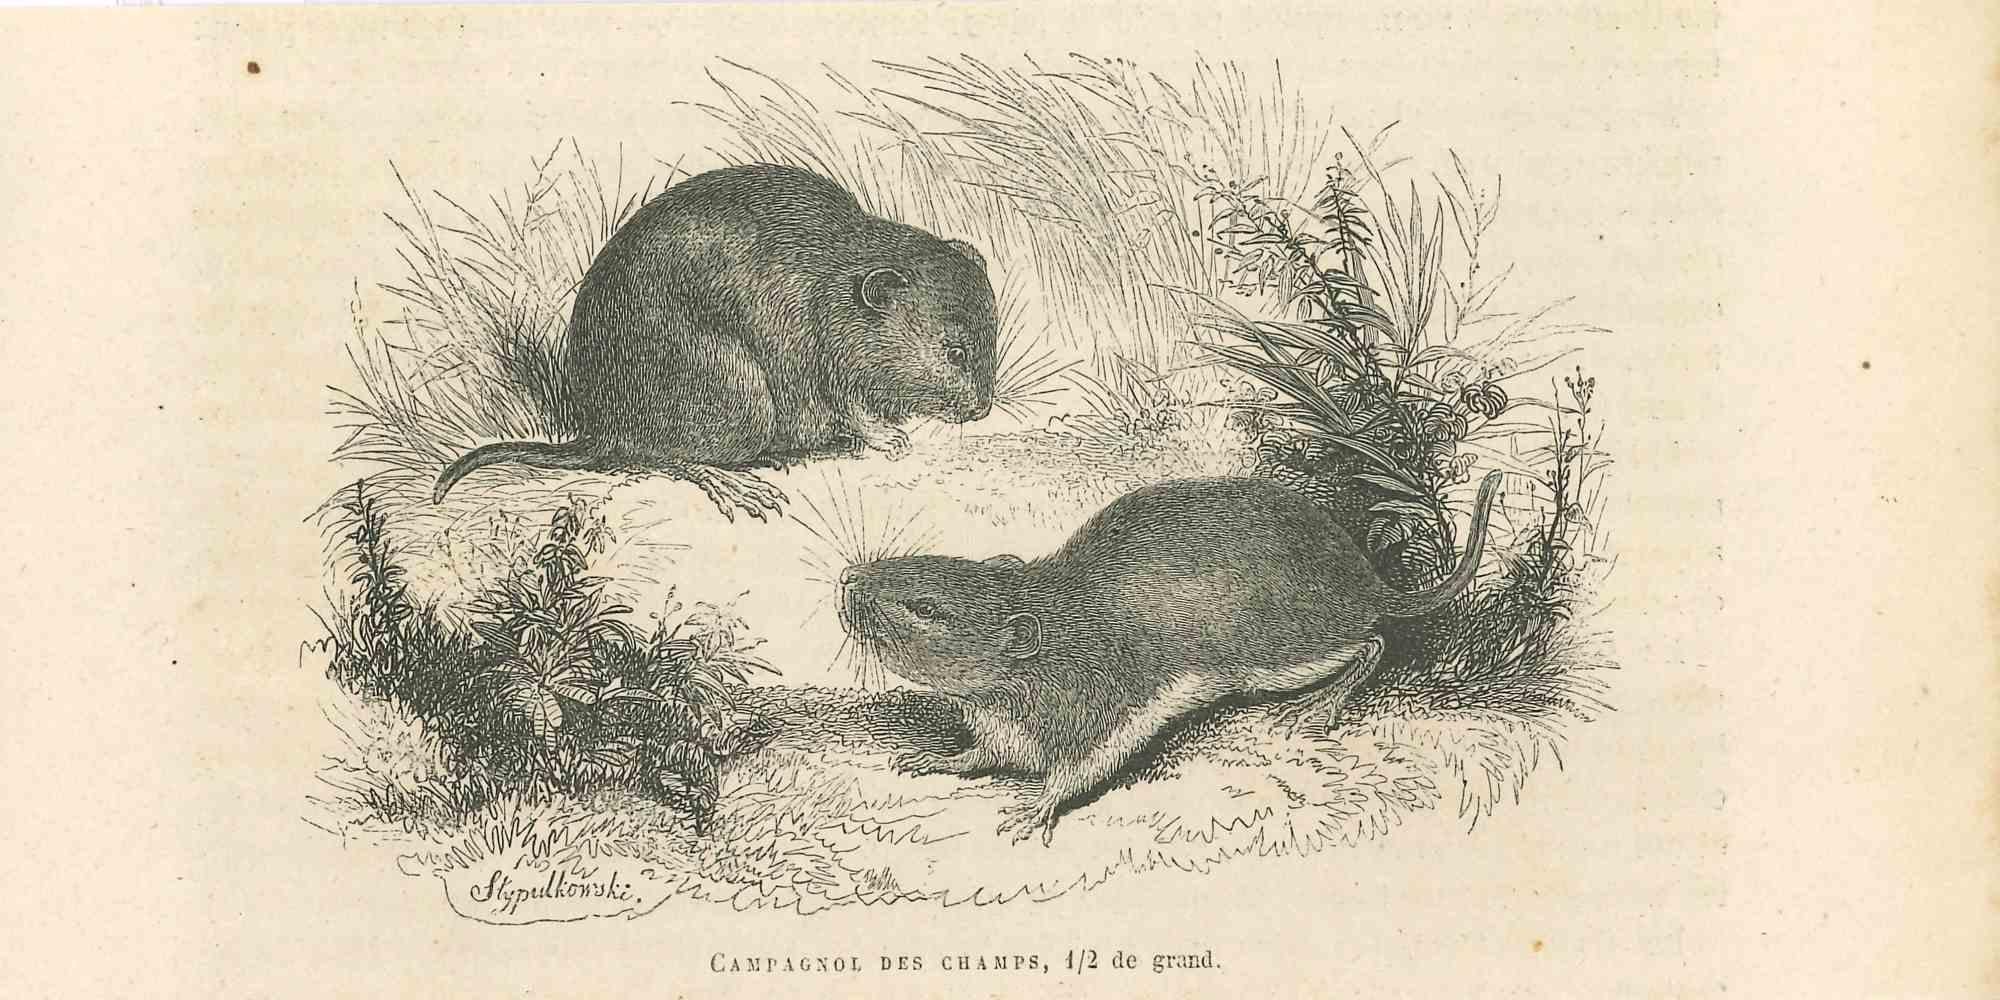 The Mouses is an original lithograph on ivory-colored paper, realized by Paul Gervais (1816-1879). The artwork is from The Series of "Les Trois Règnes de la Nature", and was published in 1854.

Good conditions.

Titled on the lower. With the notes